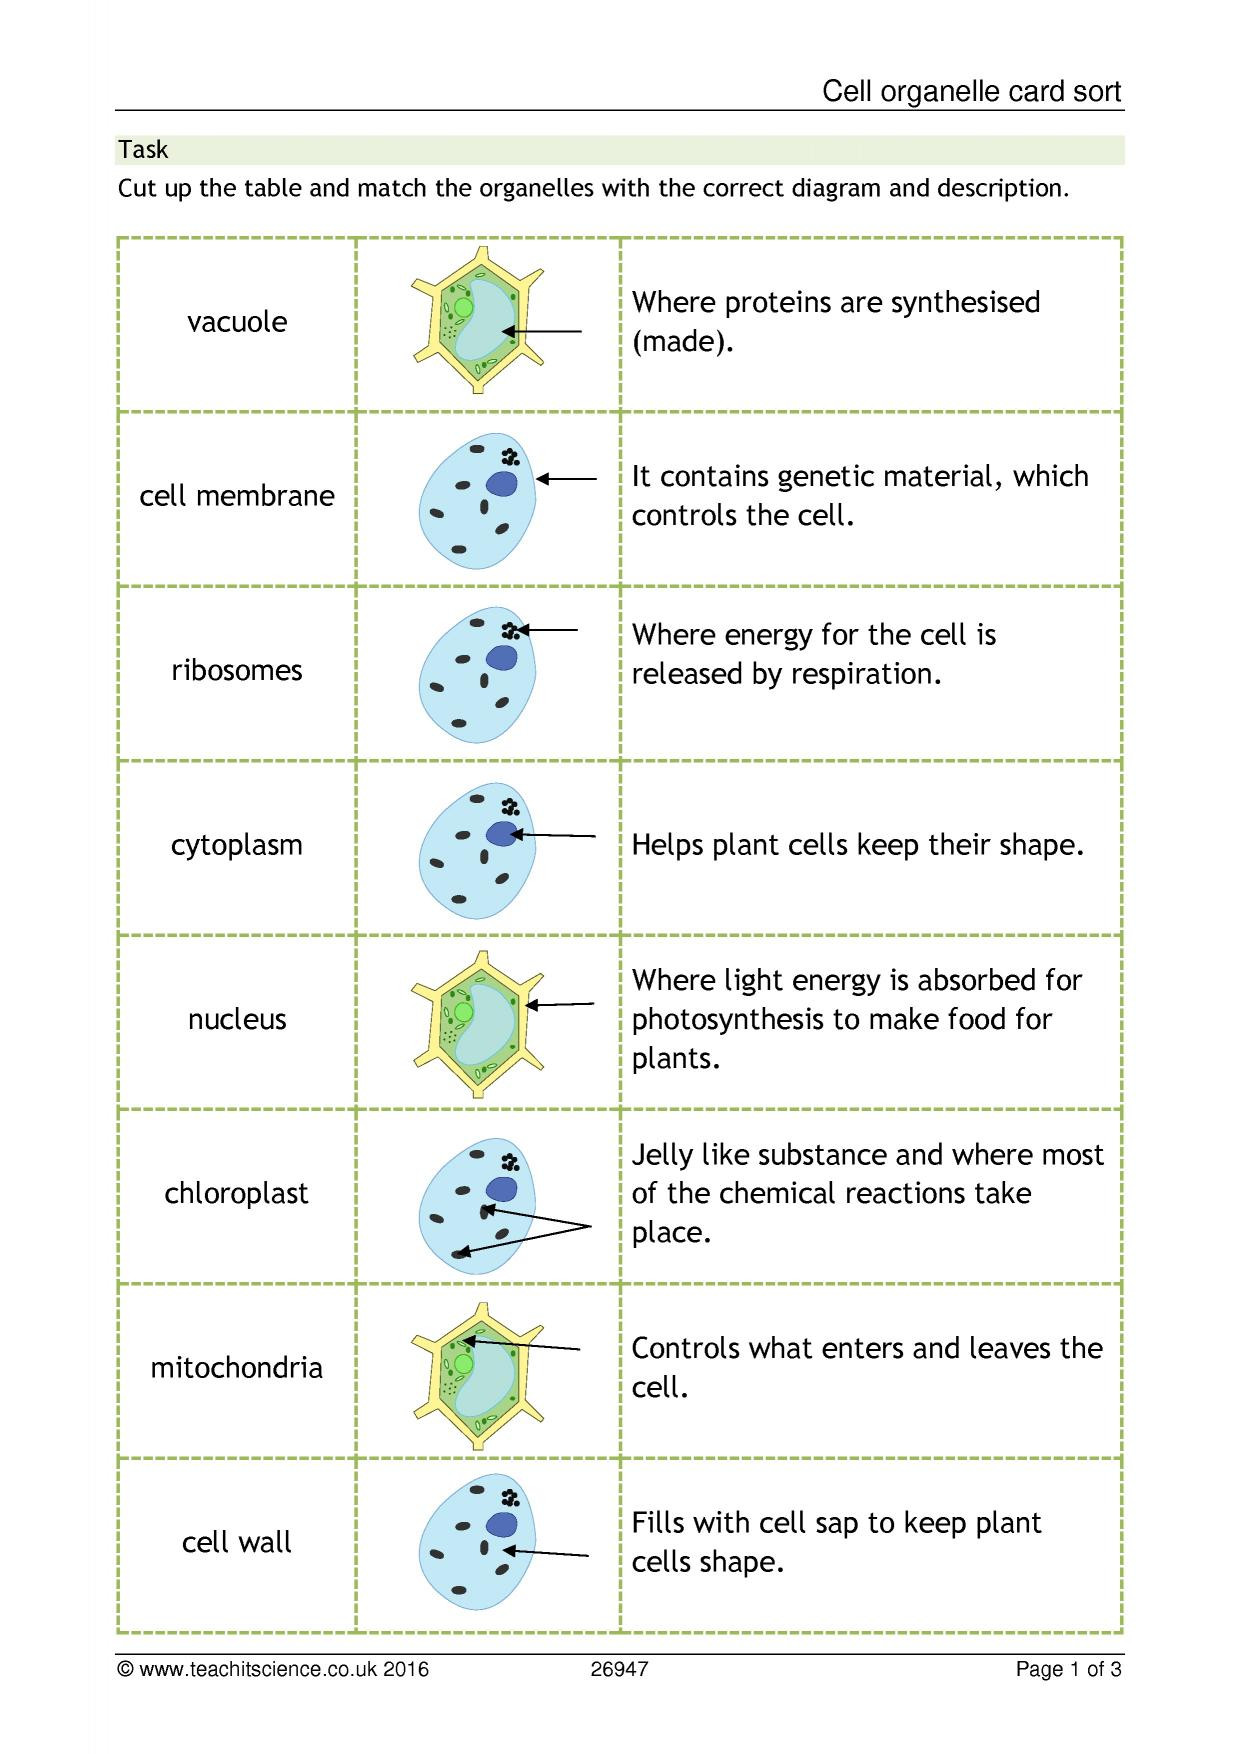 Cells and their organelles Worksheet Cellular organelle Function Matching Worksheet